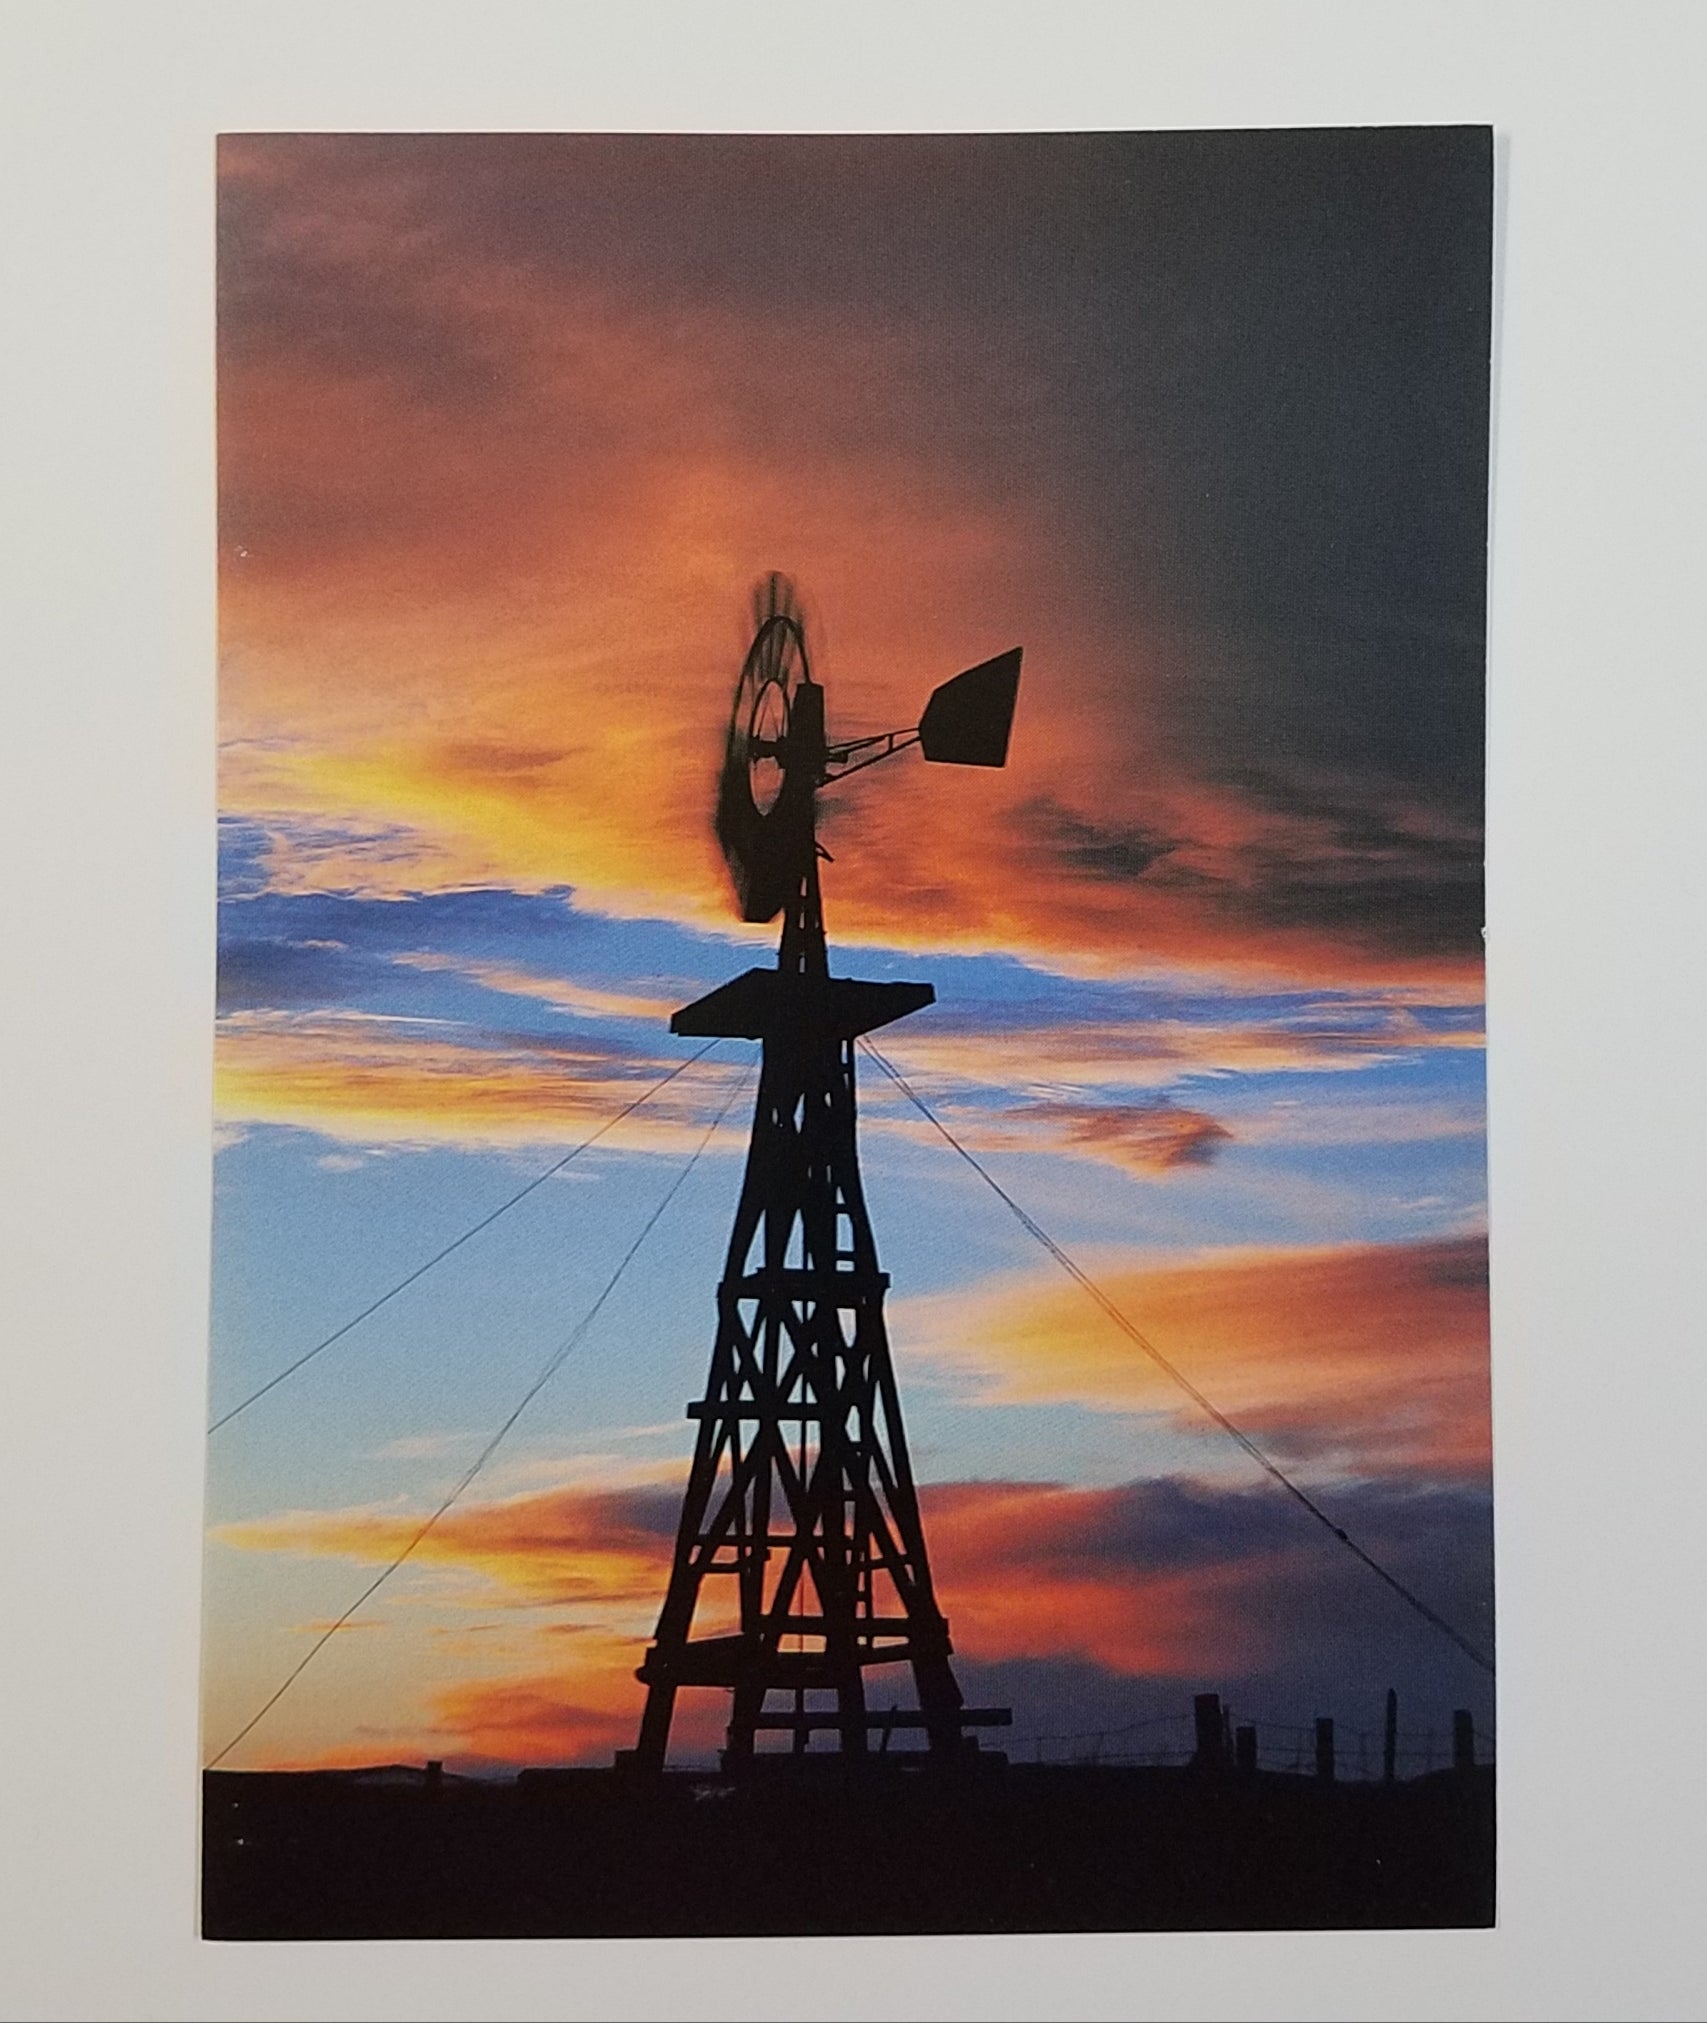 Windmill Photo Greeting Cards Photographer: Crystal Lawrence  10 card pack,- all the same photo  Blank inside  Envelopes included  4" x 6"  Windmill against a sunset  Southeast Wyoming  from: Windmill Dreaming